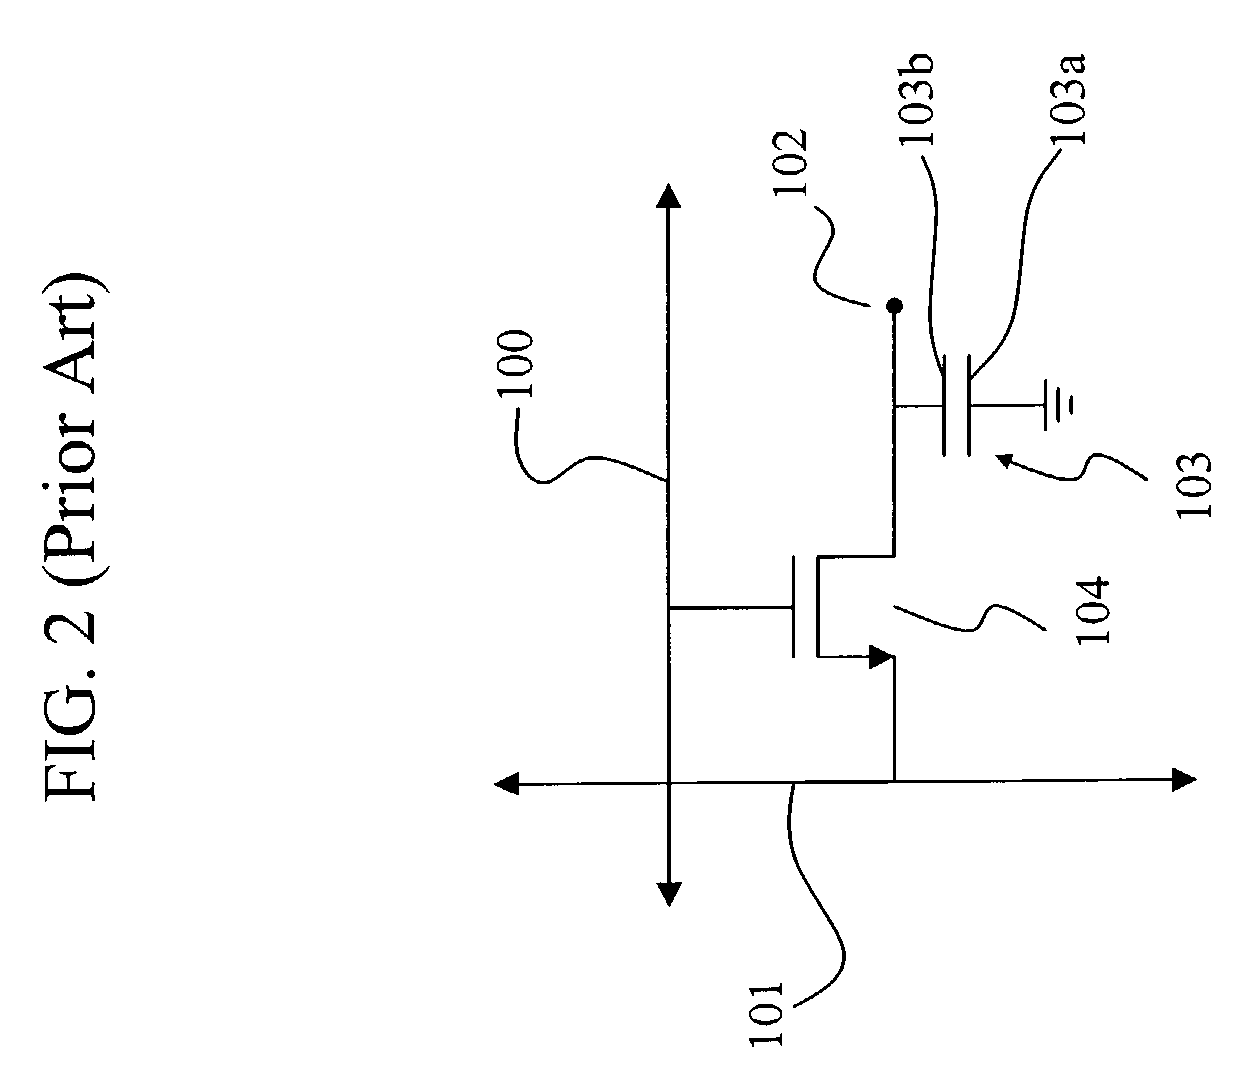 Spatial light modulator with charge-pump pixel cell